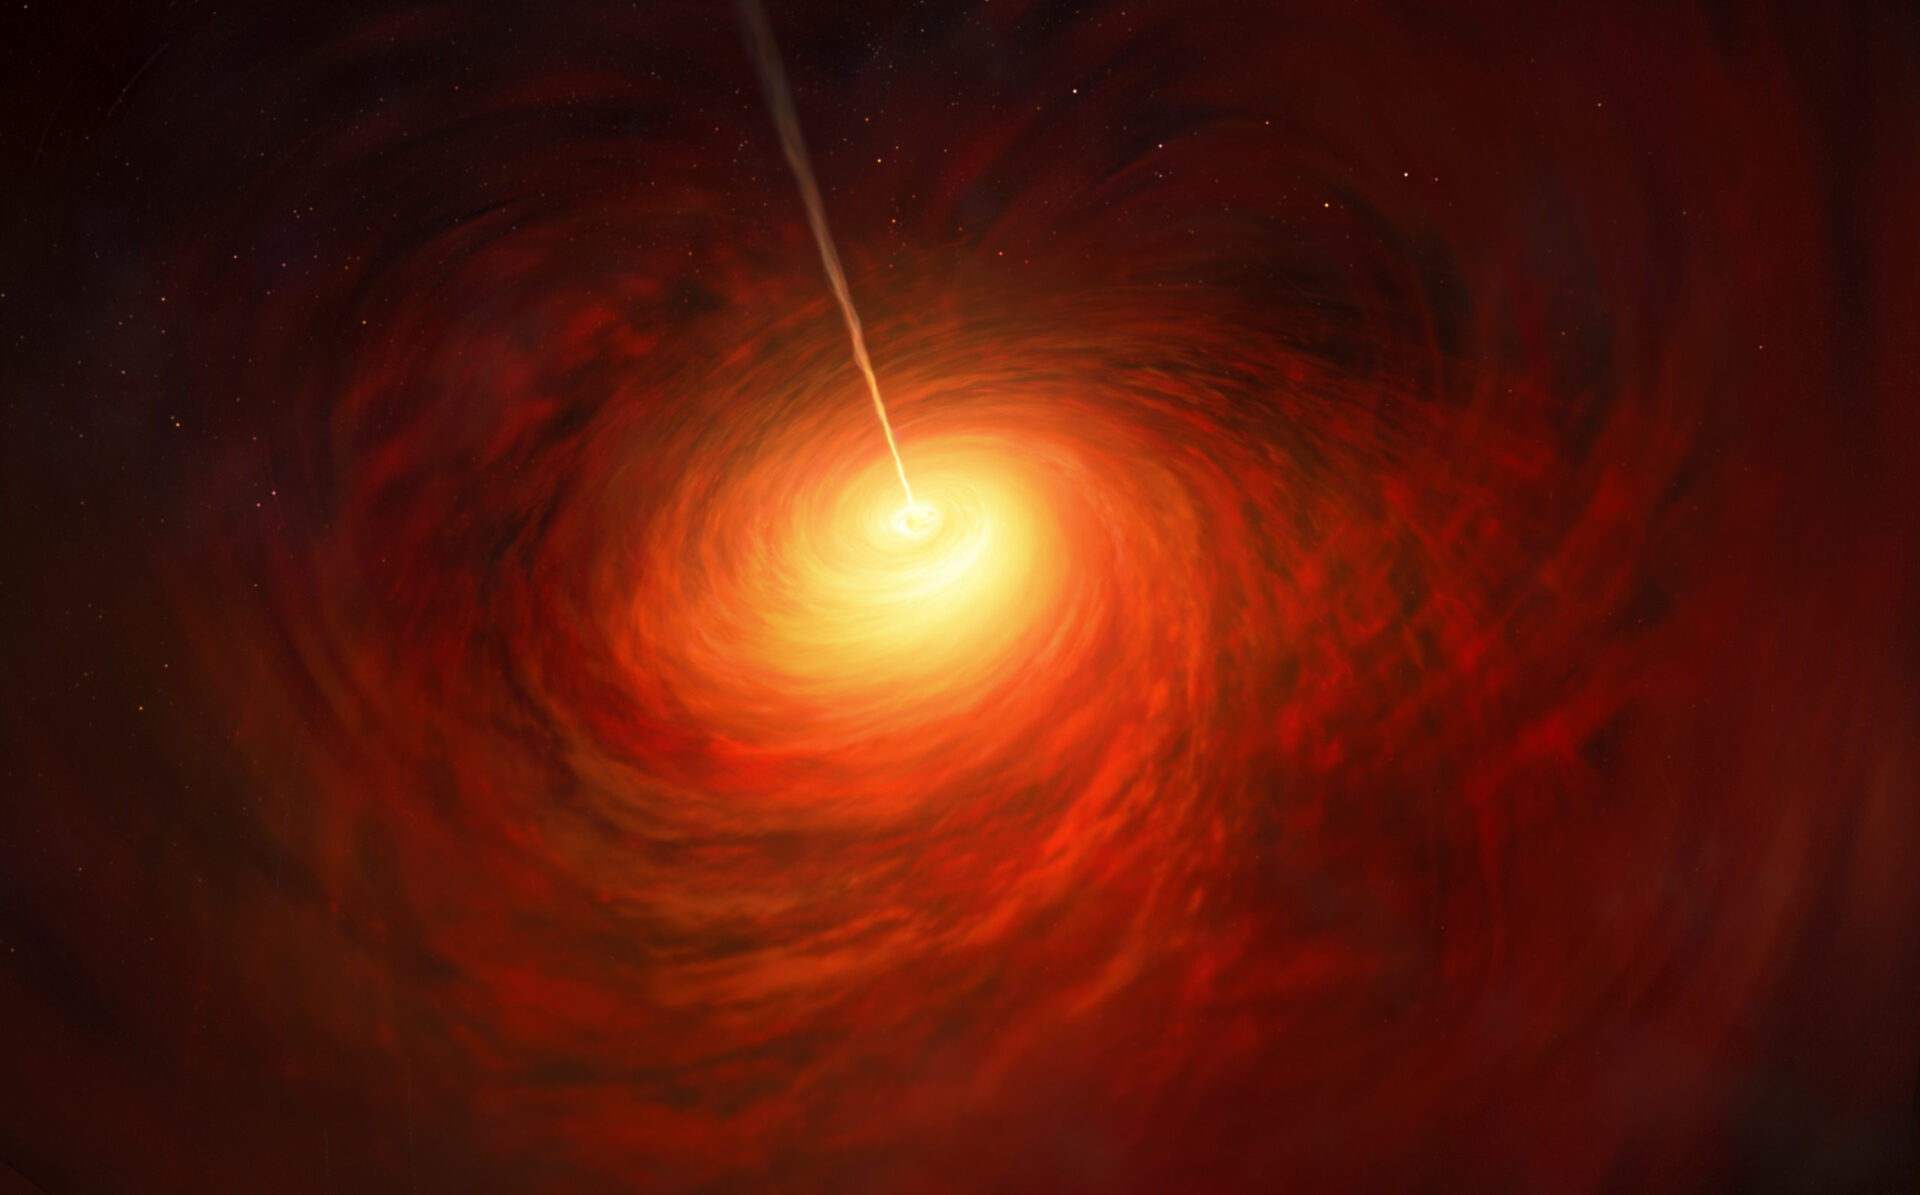 <p>This artist’s impression depicts the black hole at the heart of the enormous elliptical galaxy Messier 87 (M87). This black hole was chosen as the object of paradigm-shifting observations by the Event Horizon Telescope. The superheated material surrounding the black hole is shown, as is the relativistic jet launched by M87’s black hole. Credit: ESO/M. Kornmesser</p>
